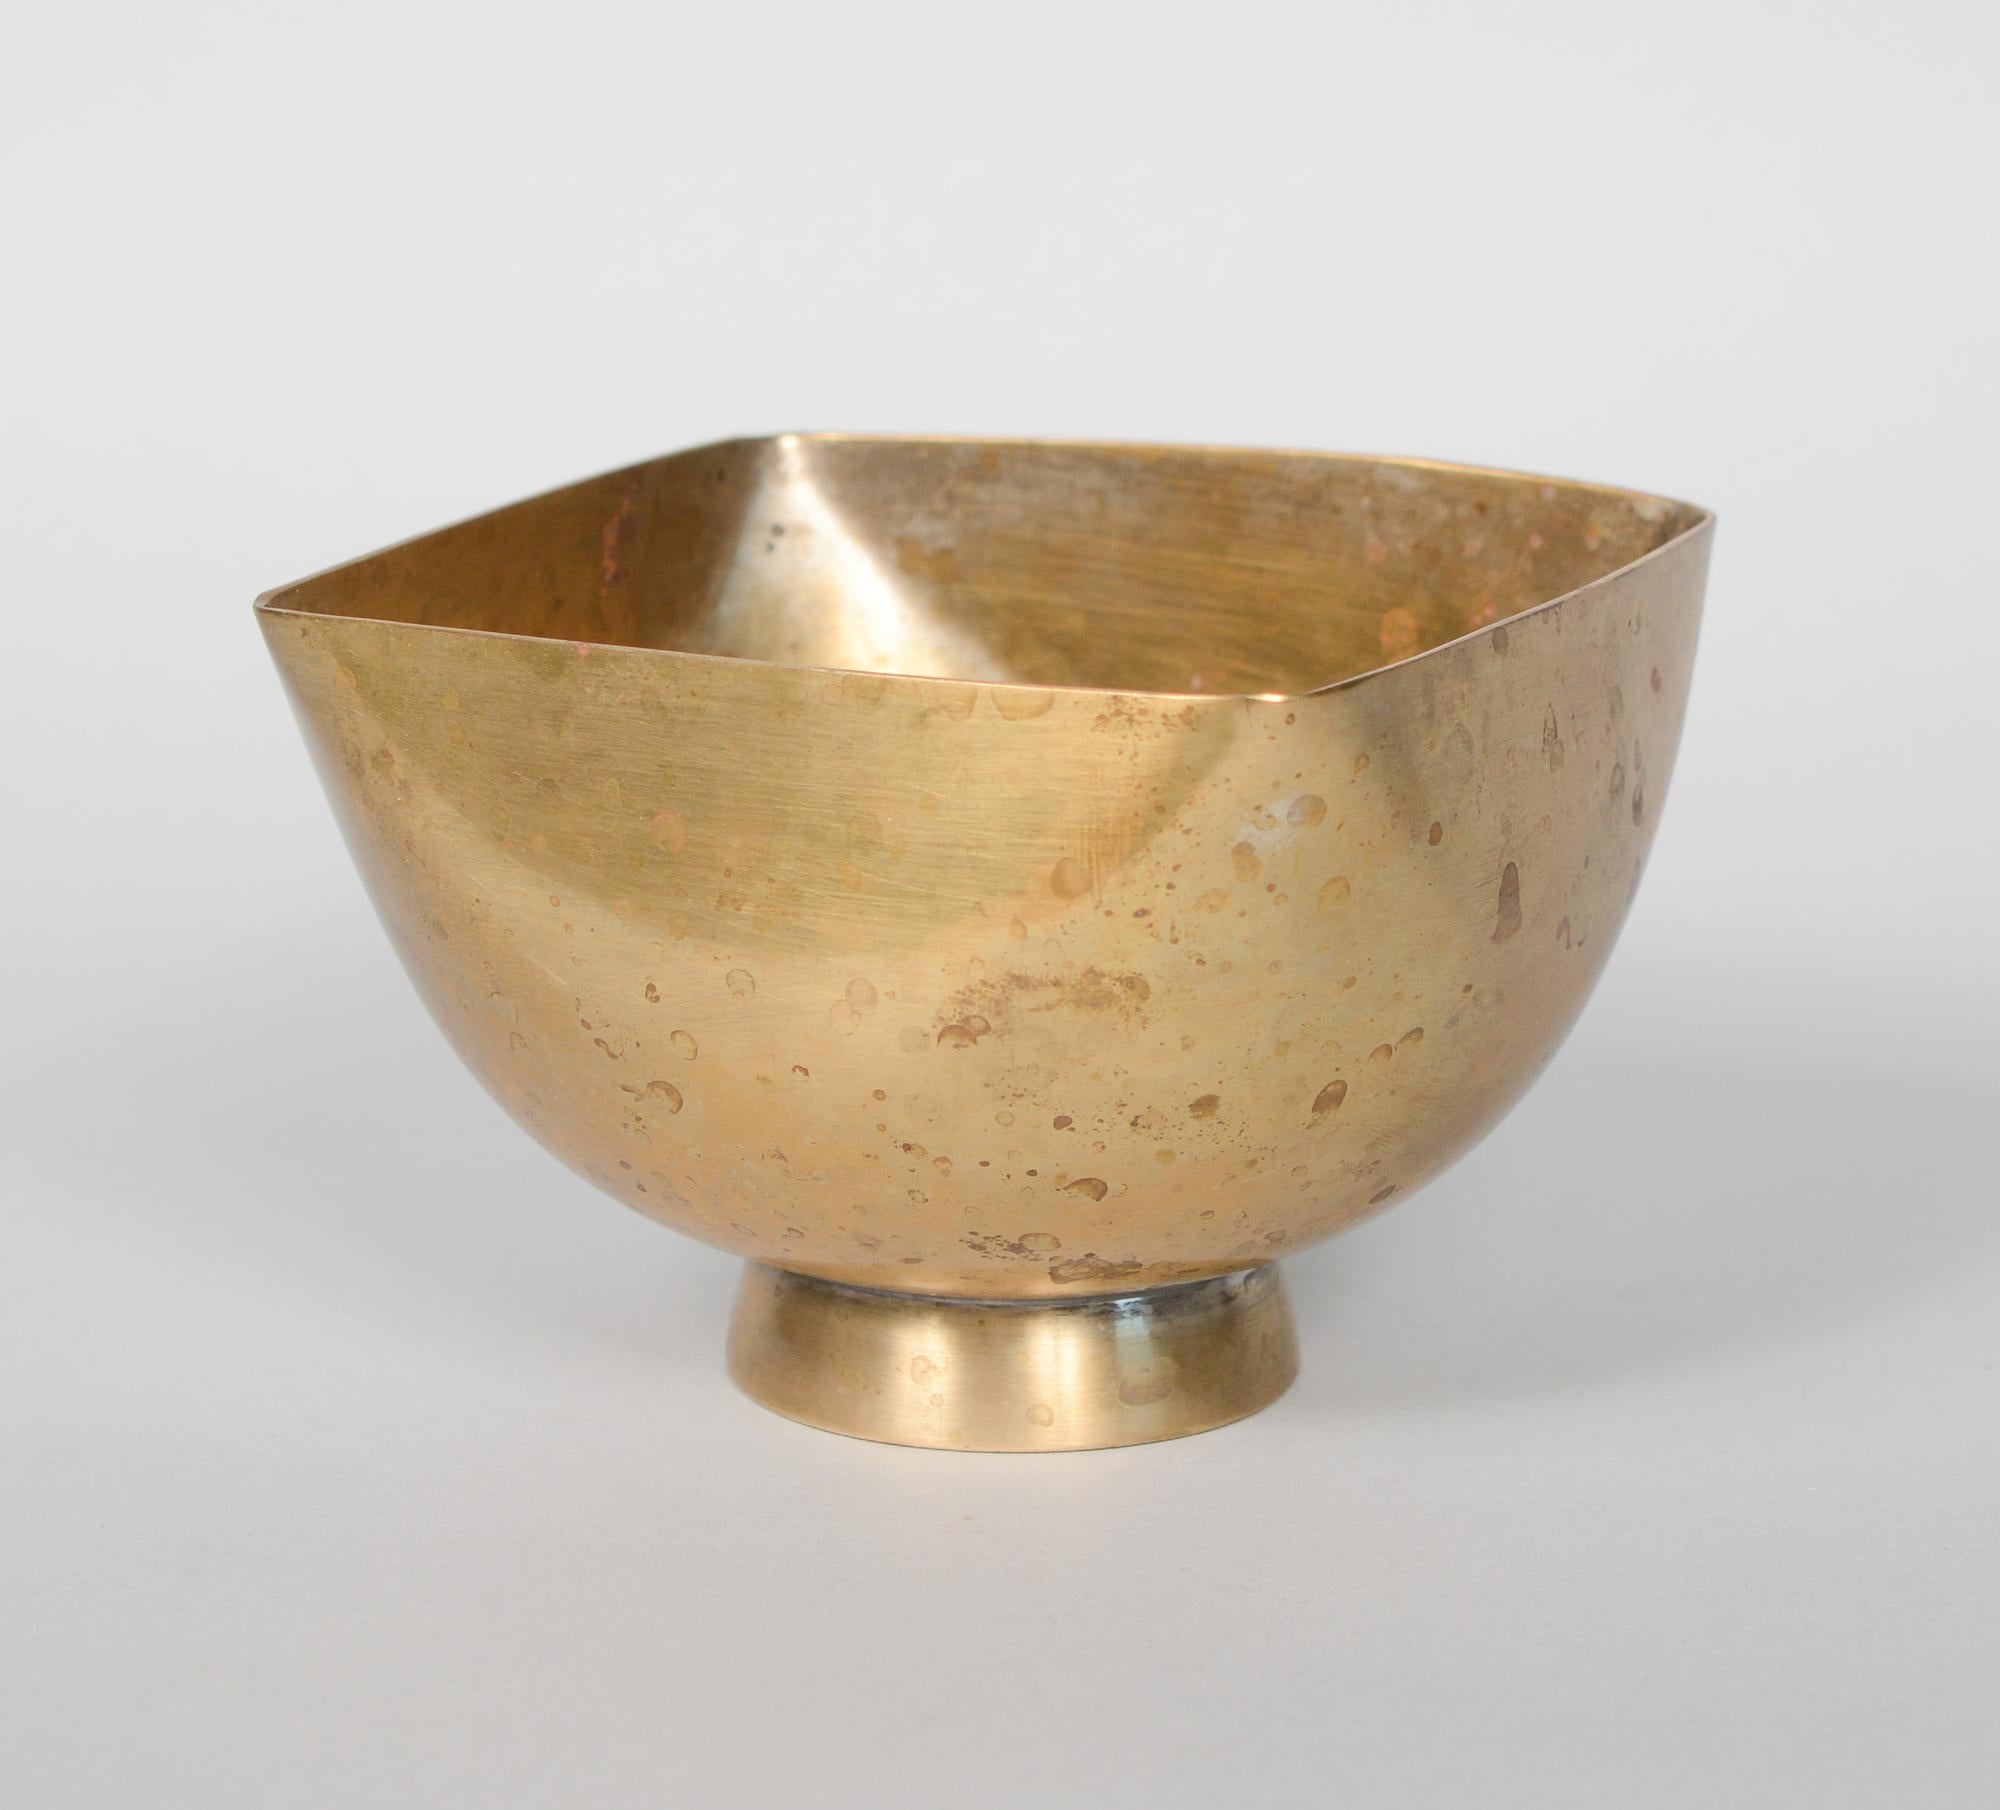 Small bowl designed by Ward Bennett. This bowl was originally silver plated. The silver has mostly worn off and the brass has developed a nice patina.